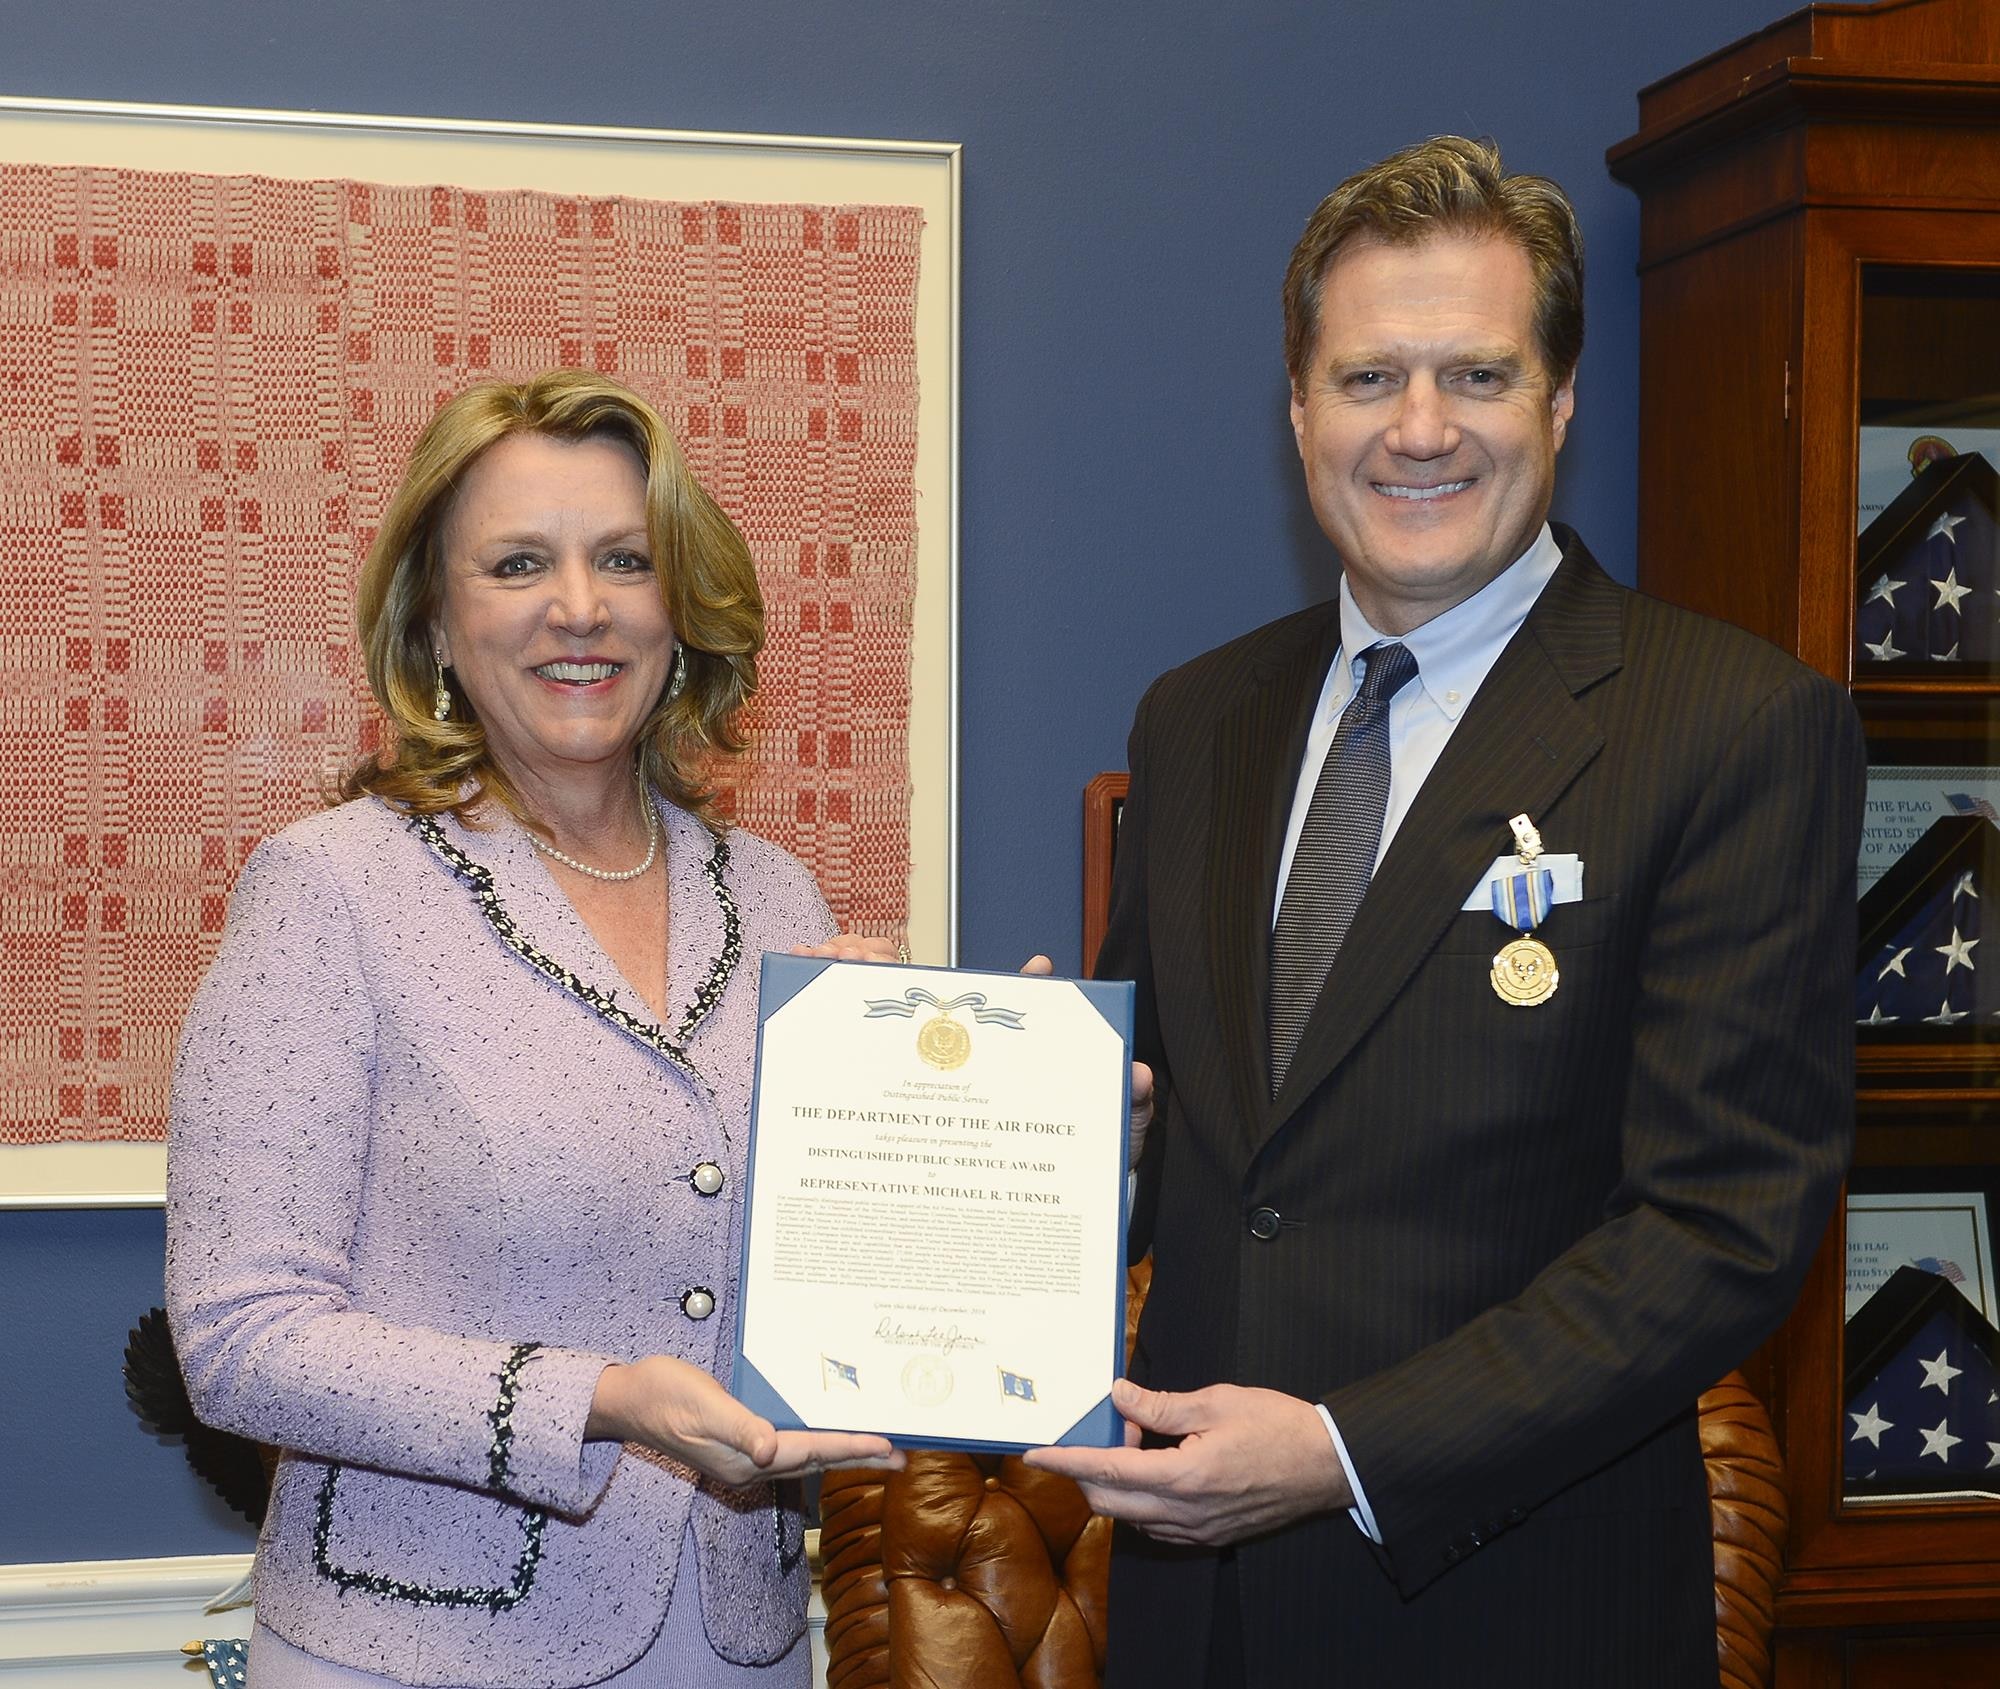 Air Force Secretary Deborah Lee James presents the Distinguished Public Service Award to U.S. Rep Michael Turner (R-OH), in Washington, D.C. Dec 6, 2016. Turner worked with fellow members of Congress to invest in Air Force mission sets and capabilities that provide America’s asymmetric advantage.  He was a key enabler of the Air Force acquisition community and focused legislative support for the National Air and Space Intelligence Center to ensure its continued strategic impact on the global mission. (U.S. Air Force photo/Andy Morataya)